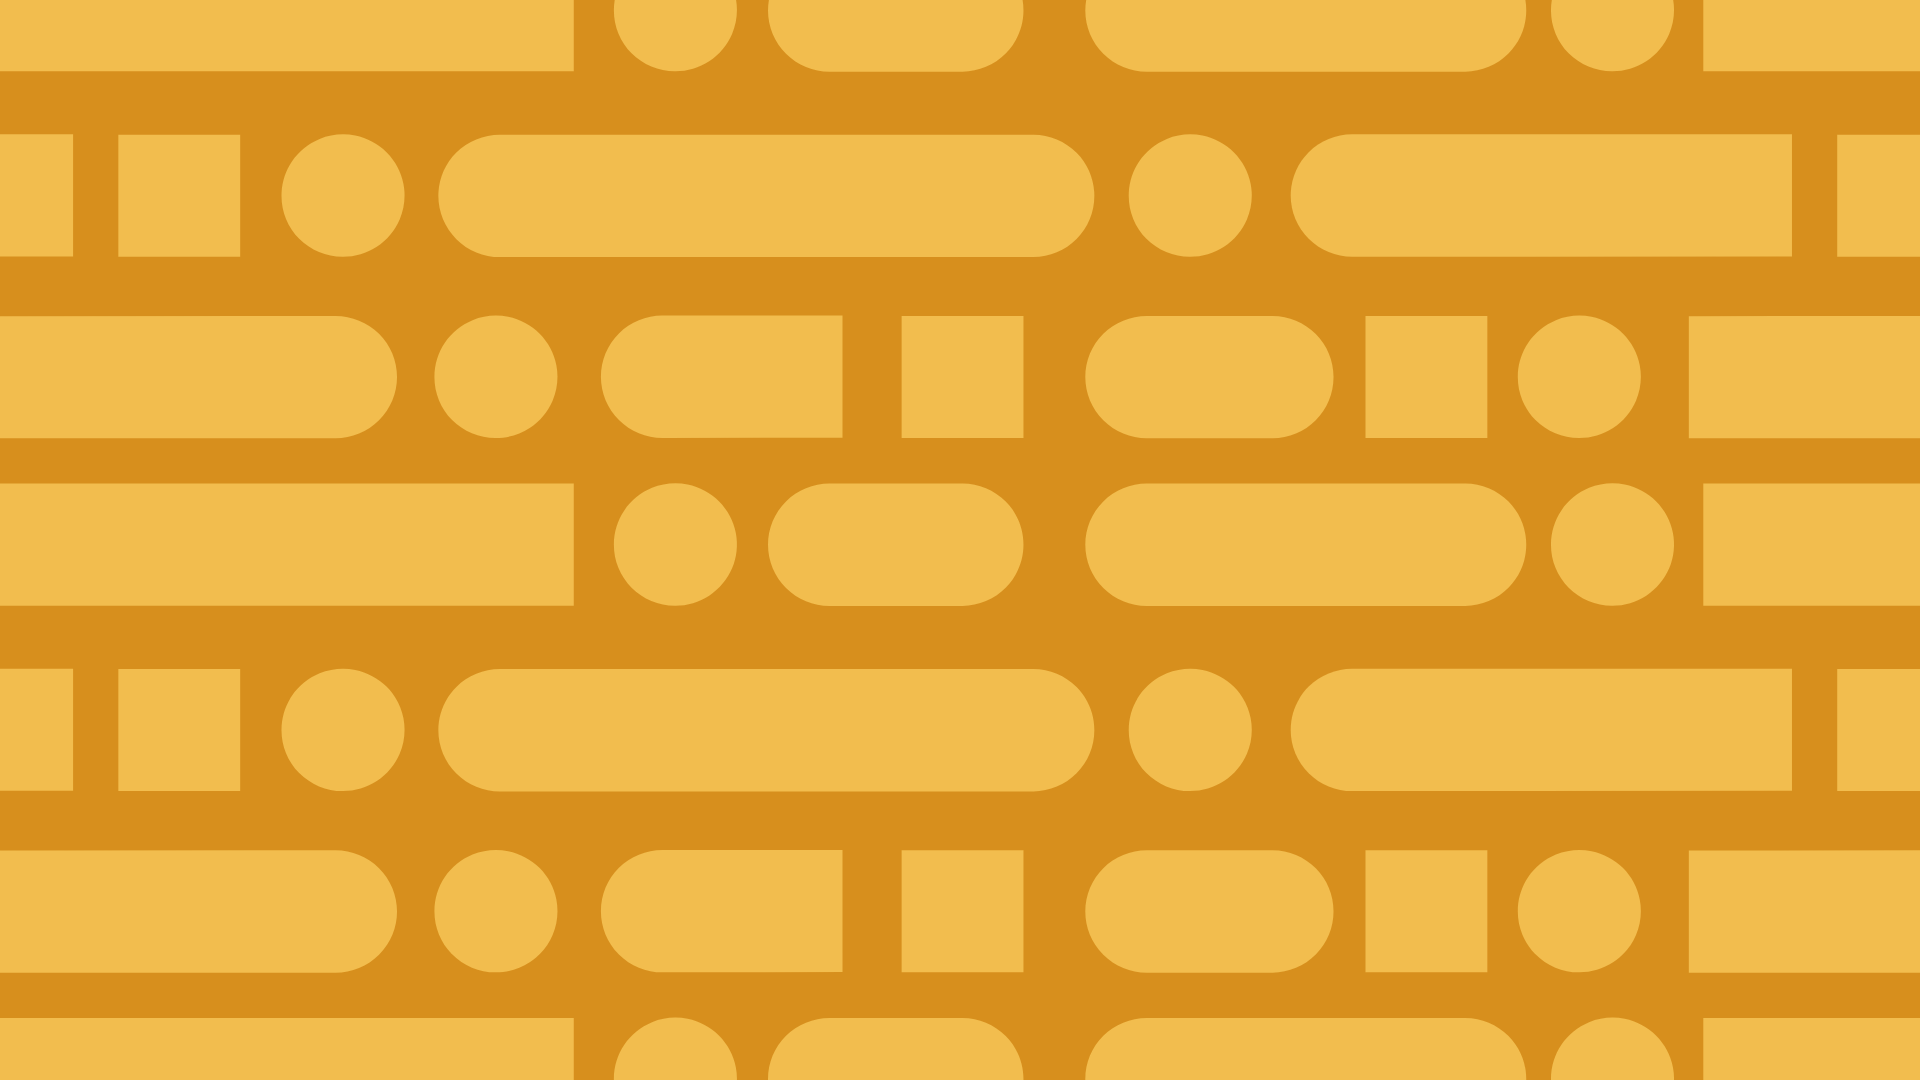 Abstract illustration of yellow circles and ellipses